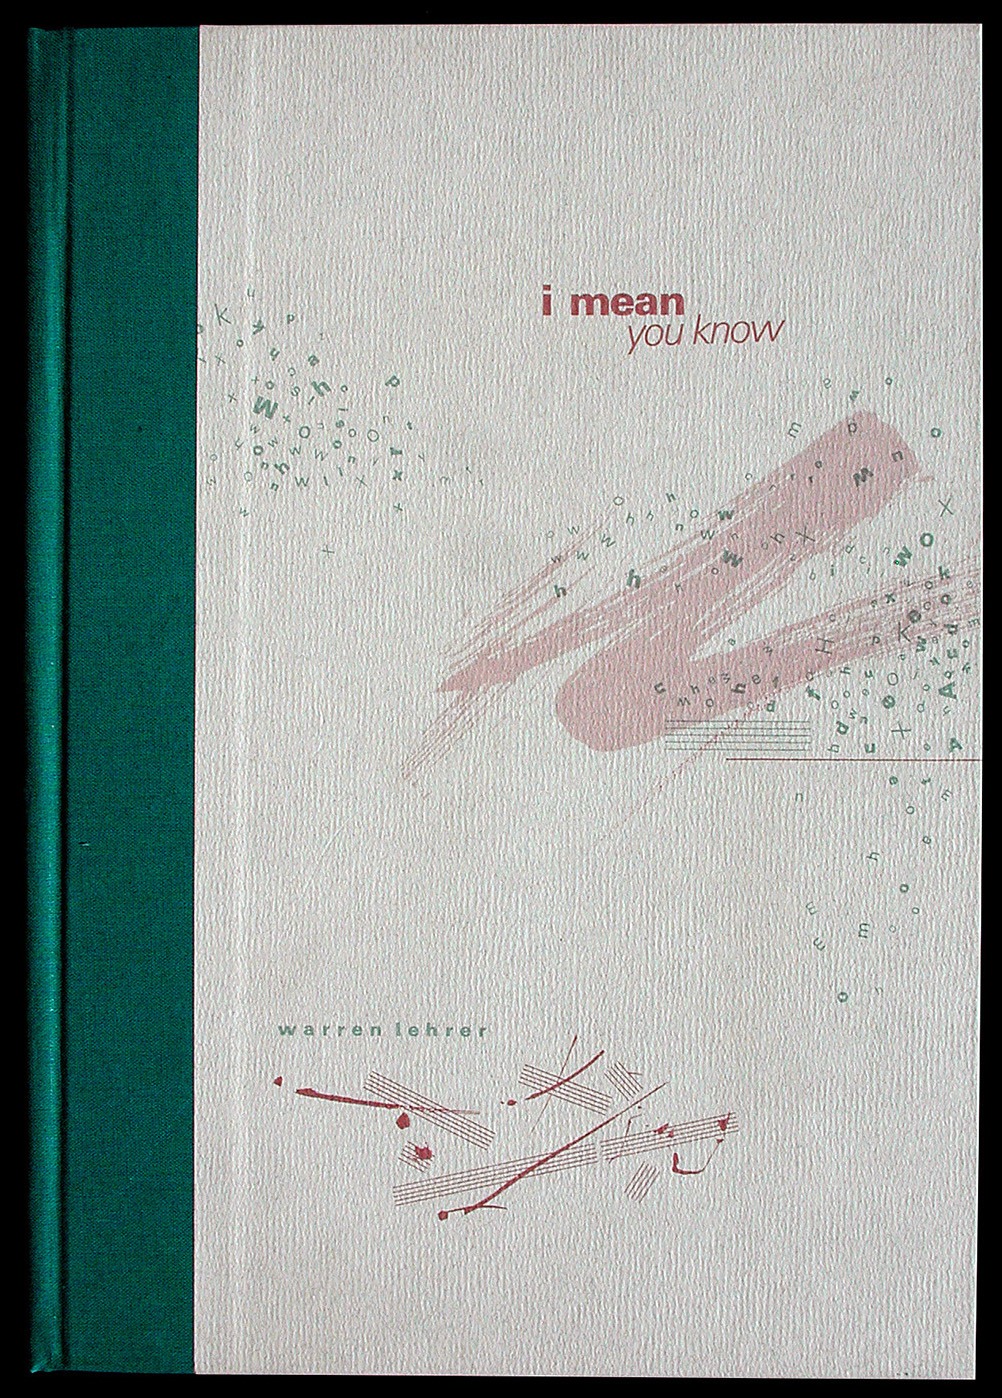 Book cover with green spine